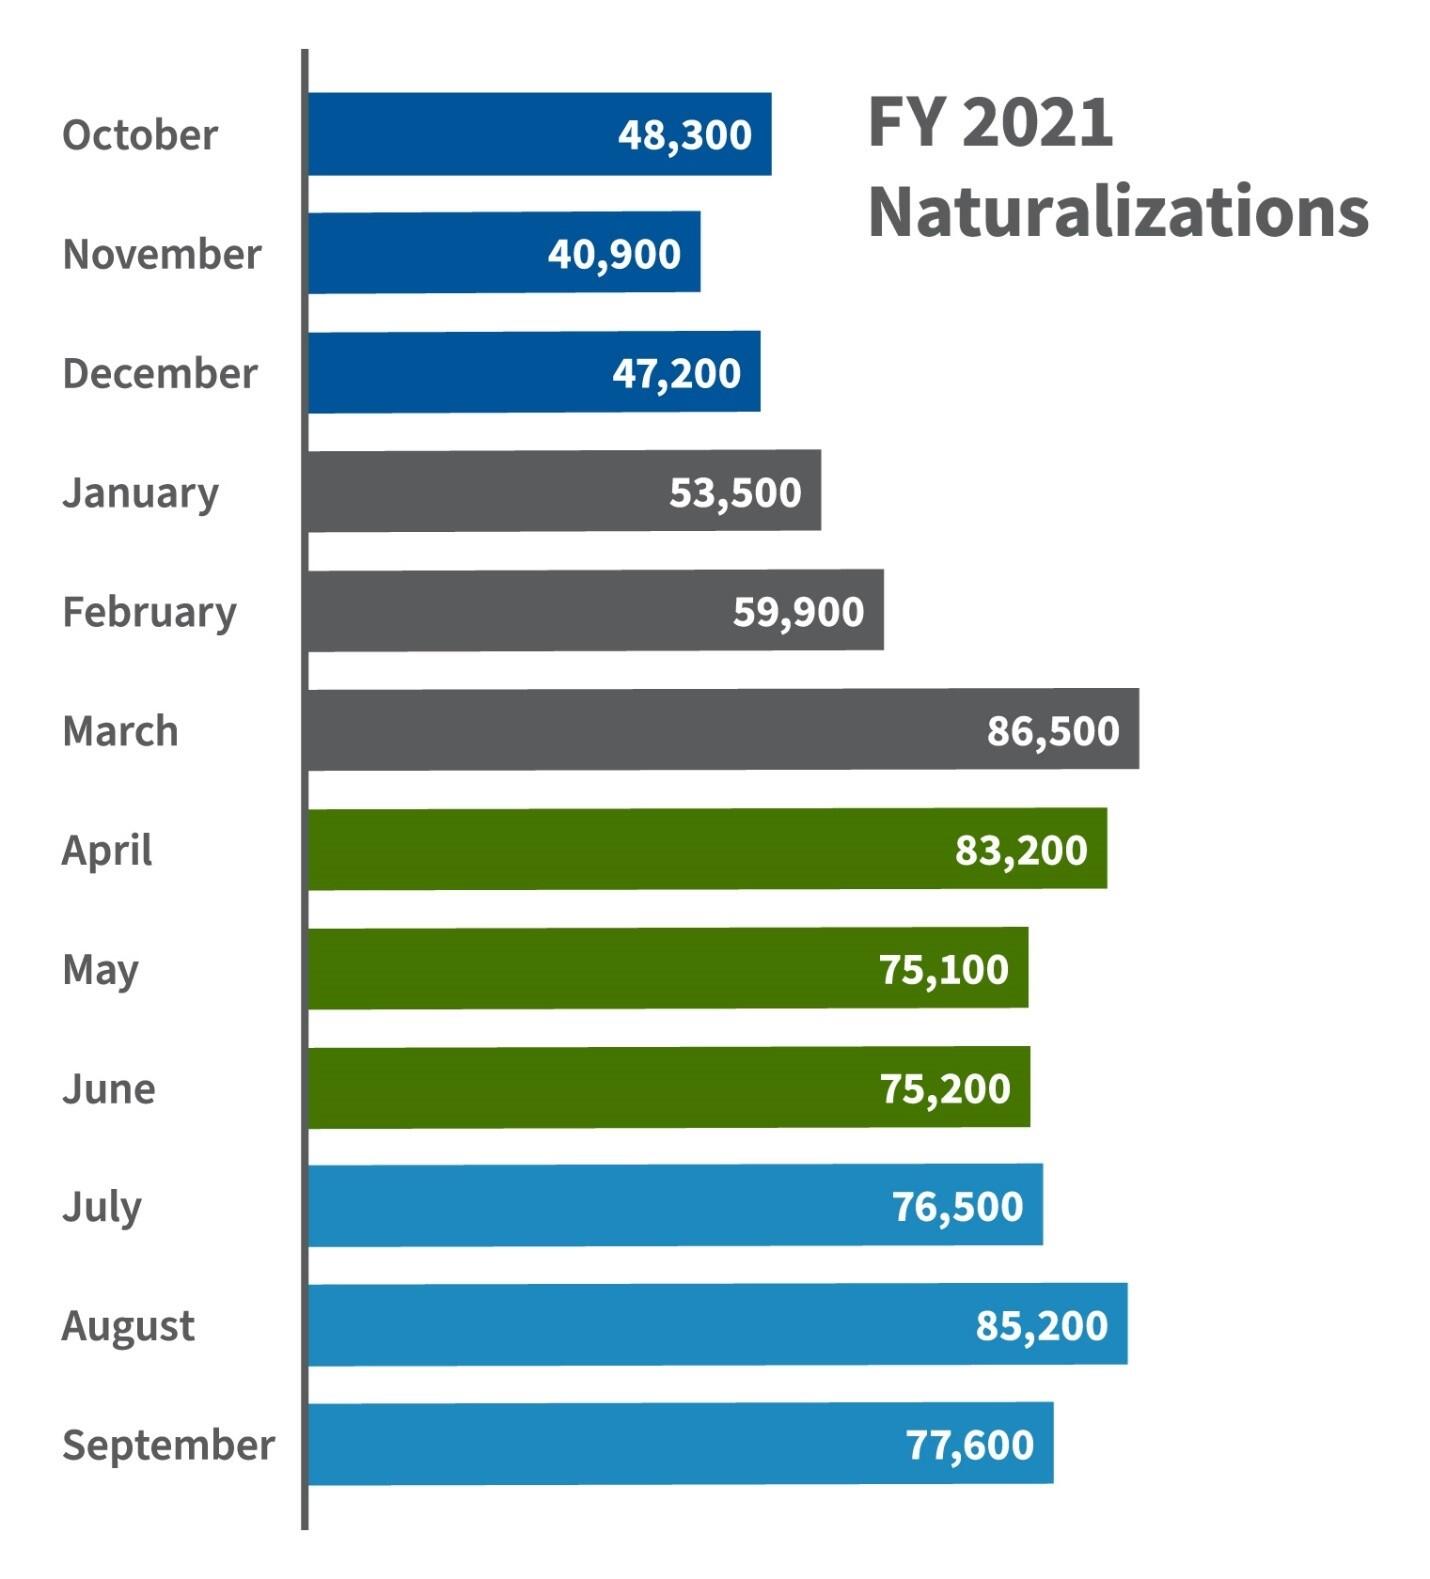 Monthly Naturalizations in FY 2021